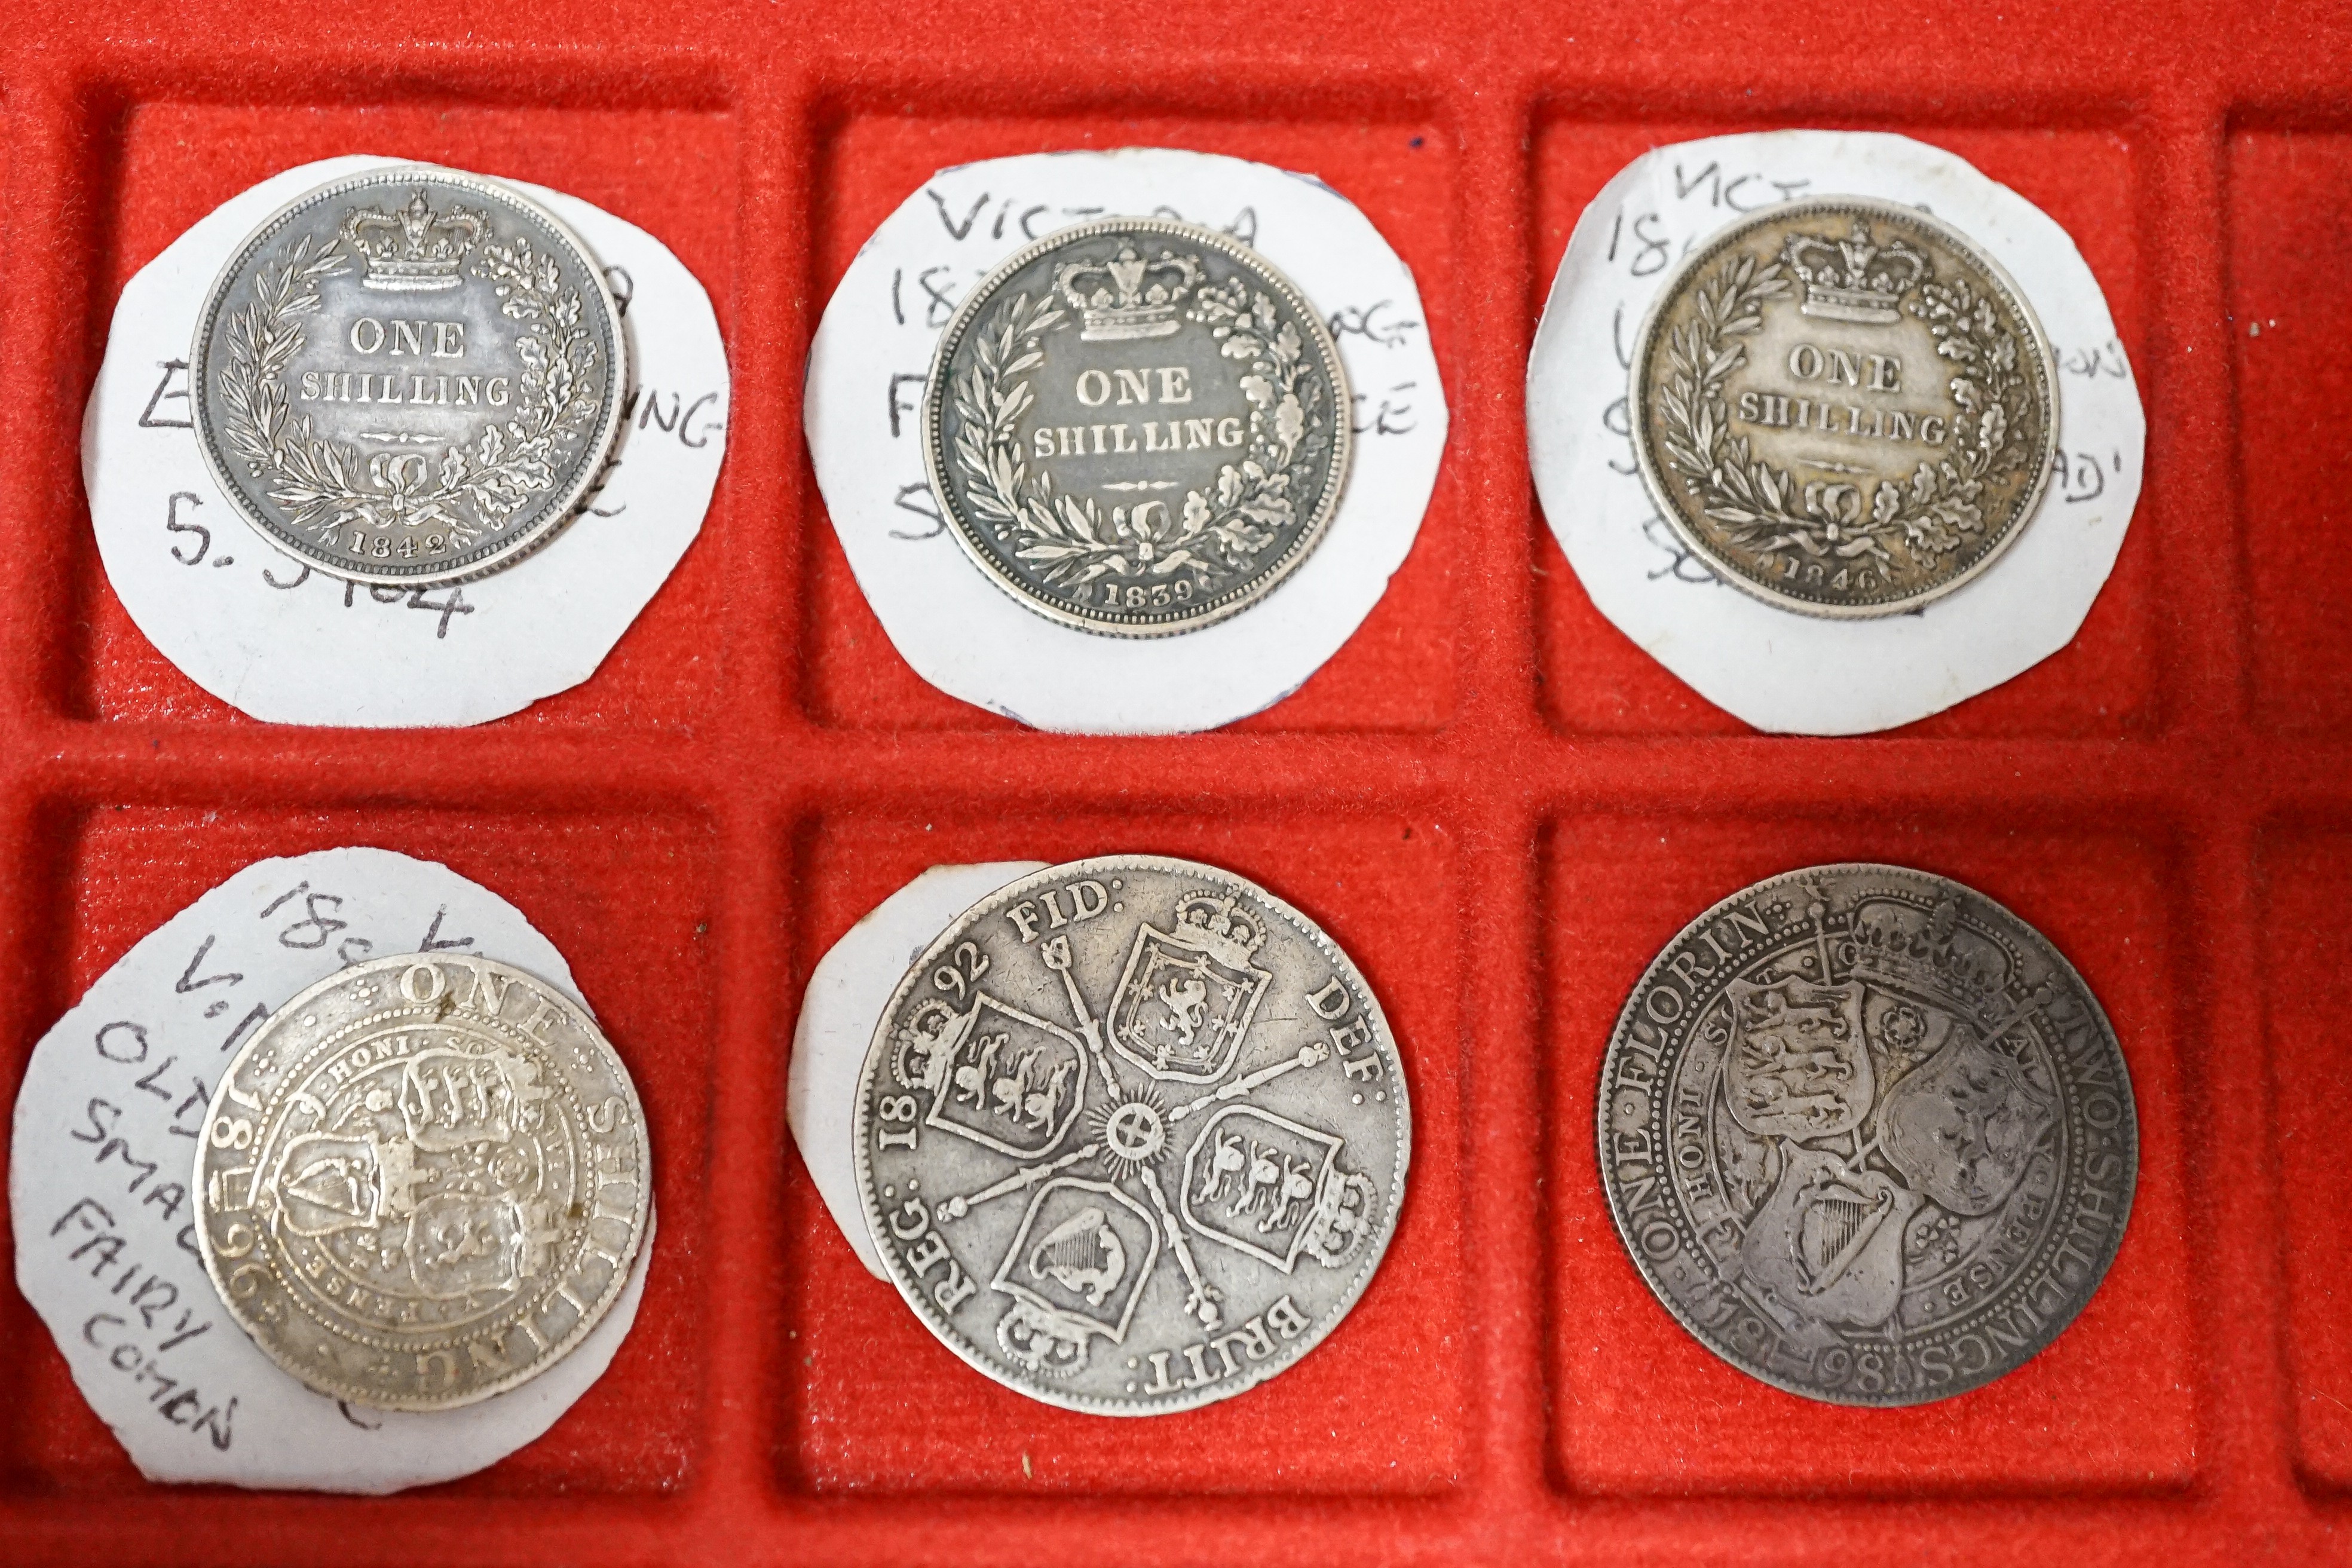 UK coins, Victoria silver coins, halfcrowns 1887, 1897, florins 1892, 1898, shillings 1839, 1846, 1842, 1872, 1818, 1896, 1897 and an 1881 sixpence, VG to EF